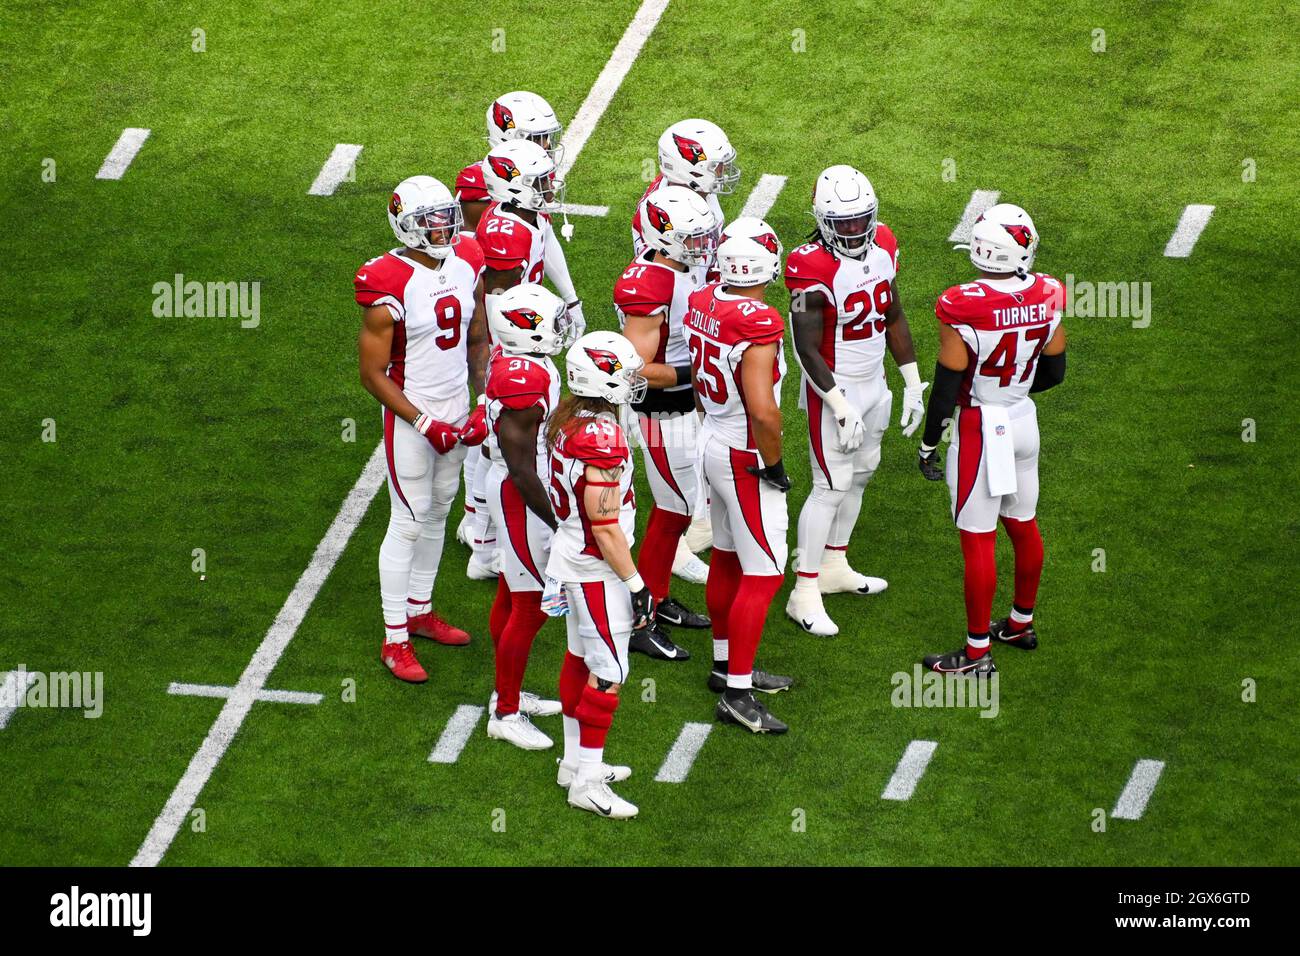 Arizona Cardinals during an NFL football game against the Los Angeles Rams, Sunday, Oct. 3, 2021, in Inglewood, Calif. The Arizona Cardinals defeated the Los Angeles Rams 37-20. (Dylan Stewart/Image of Sport/Sipa USA) Stock Photo